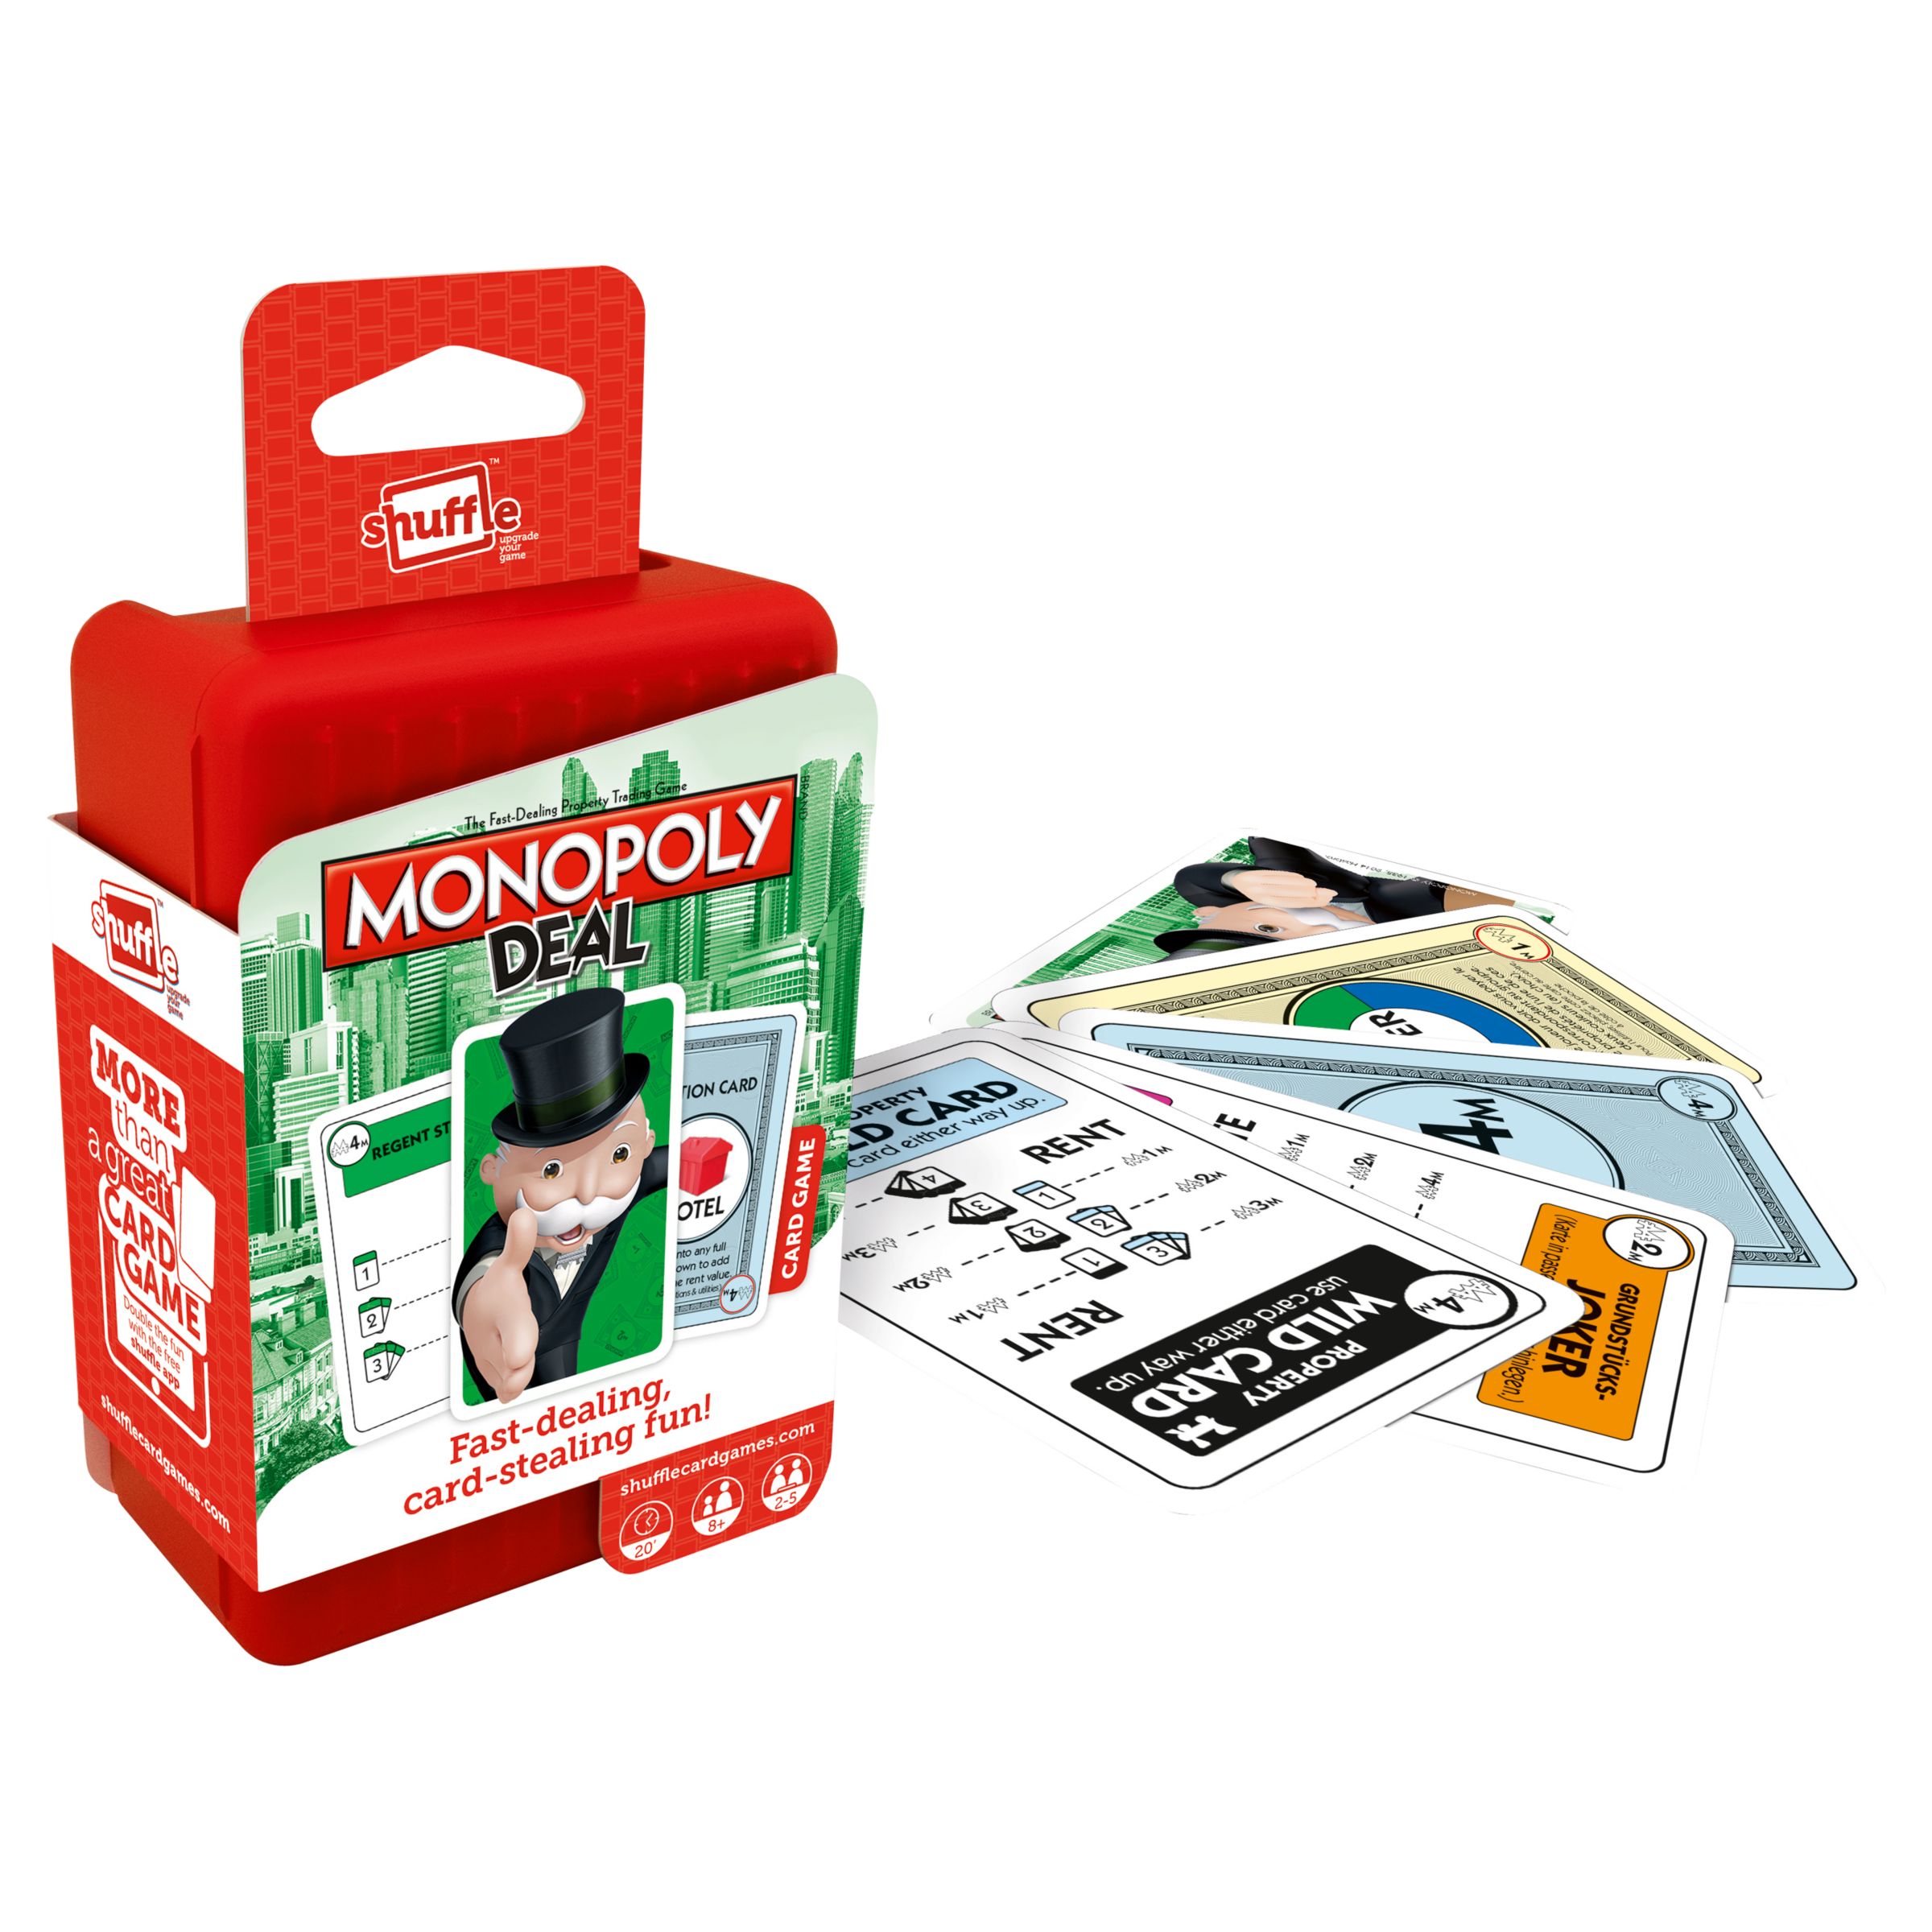 Monopoly Deal Shuffle Card Game